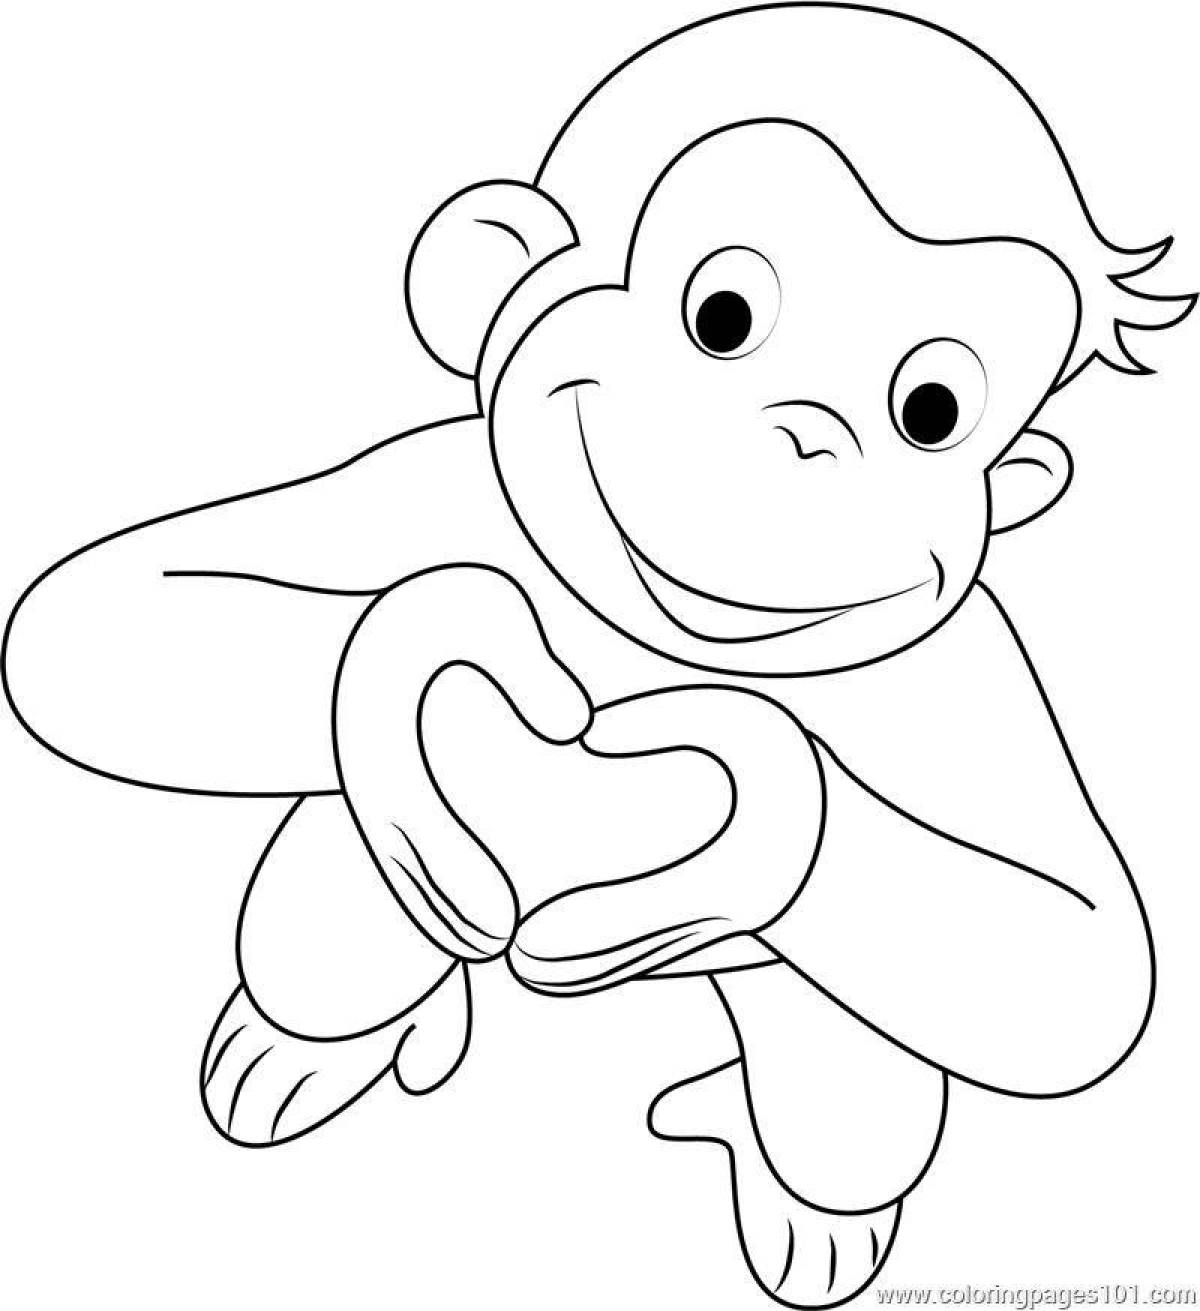 Irresistible monkey coloring book for kids